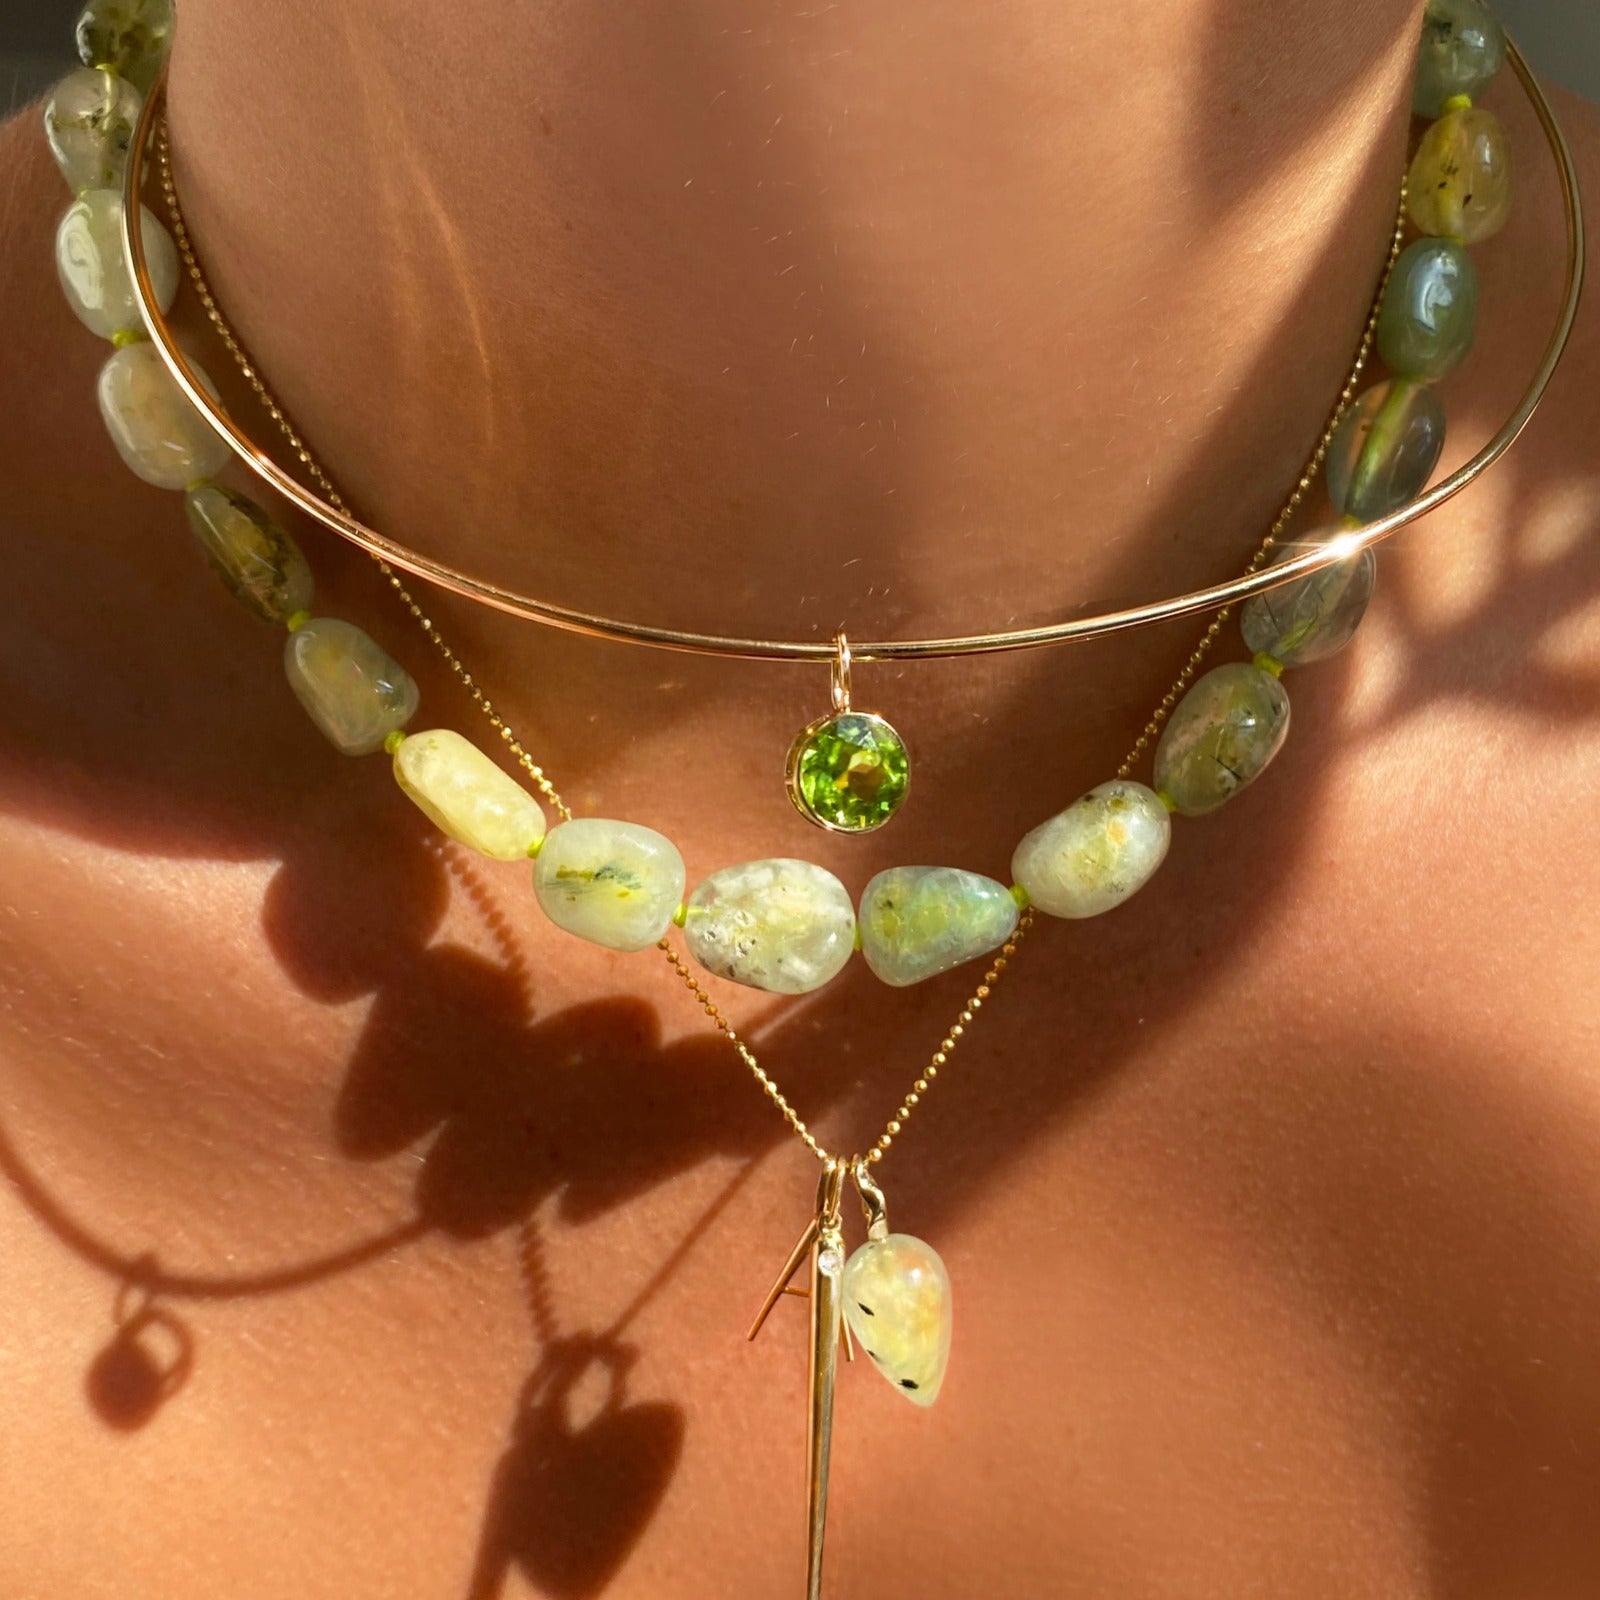 14k gold Peridot Round Solitaire Charm. Styled on a neck hanging from a wire choker necklace.